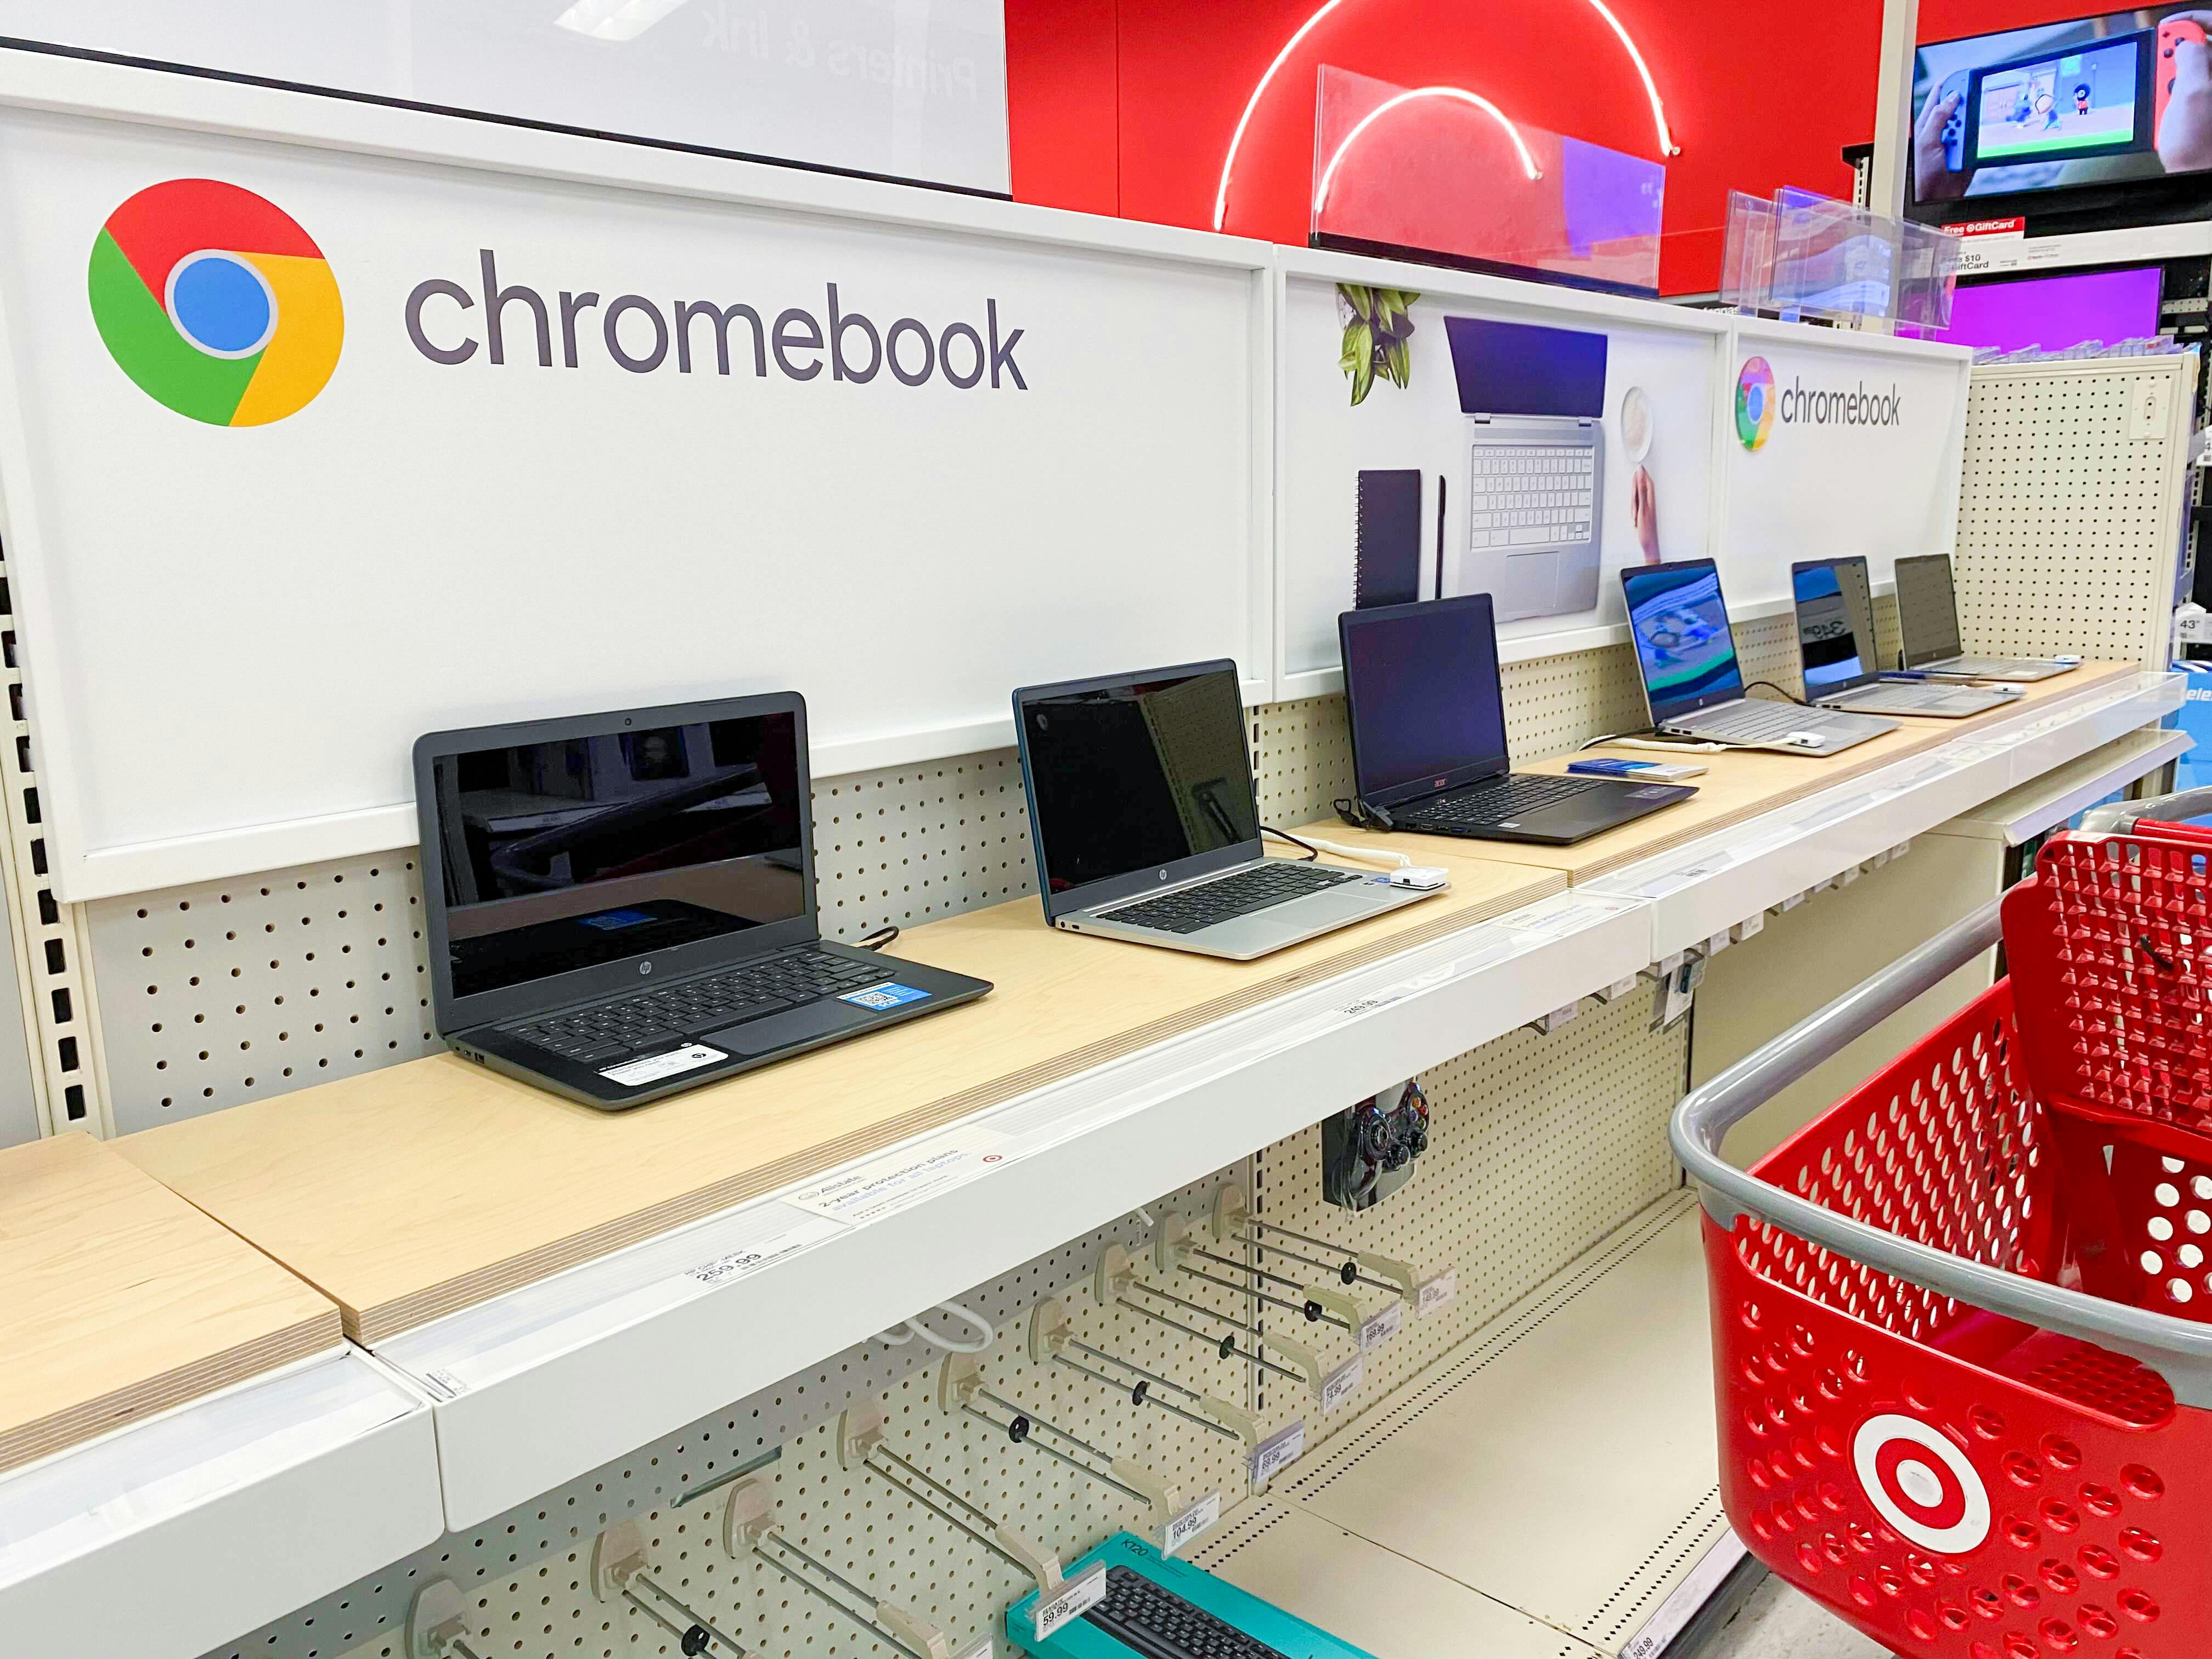 A Target shopping cart parked in front of the Chromebook display in the electronics department in Target.